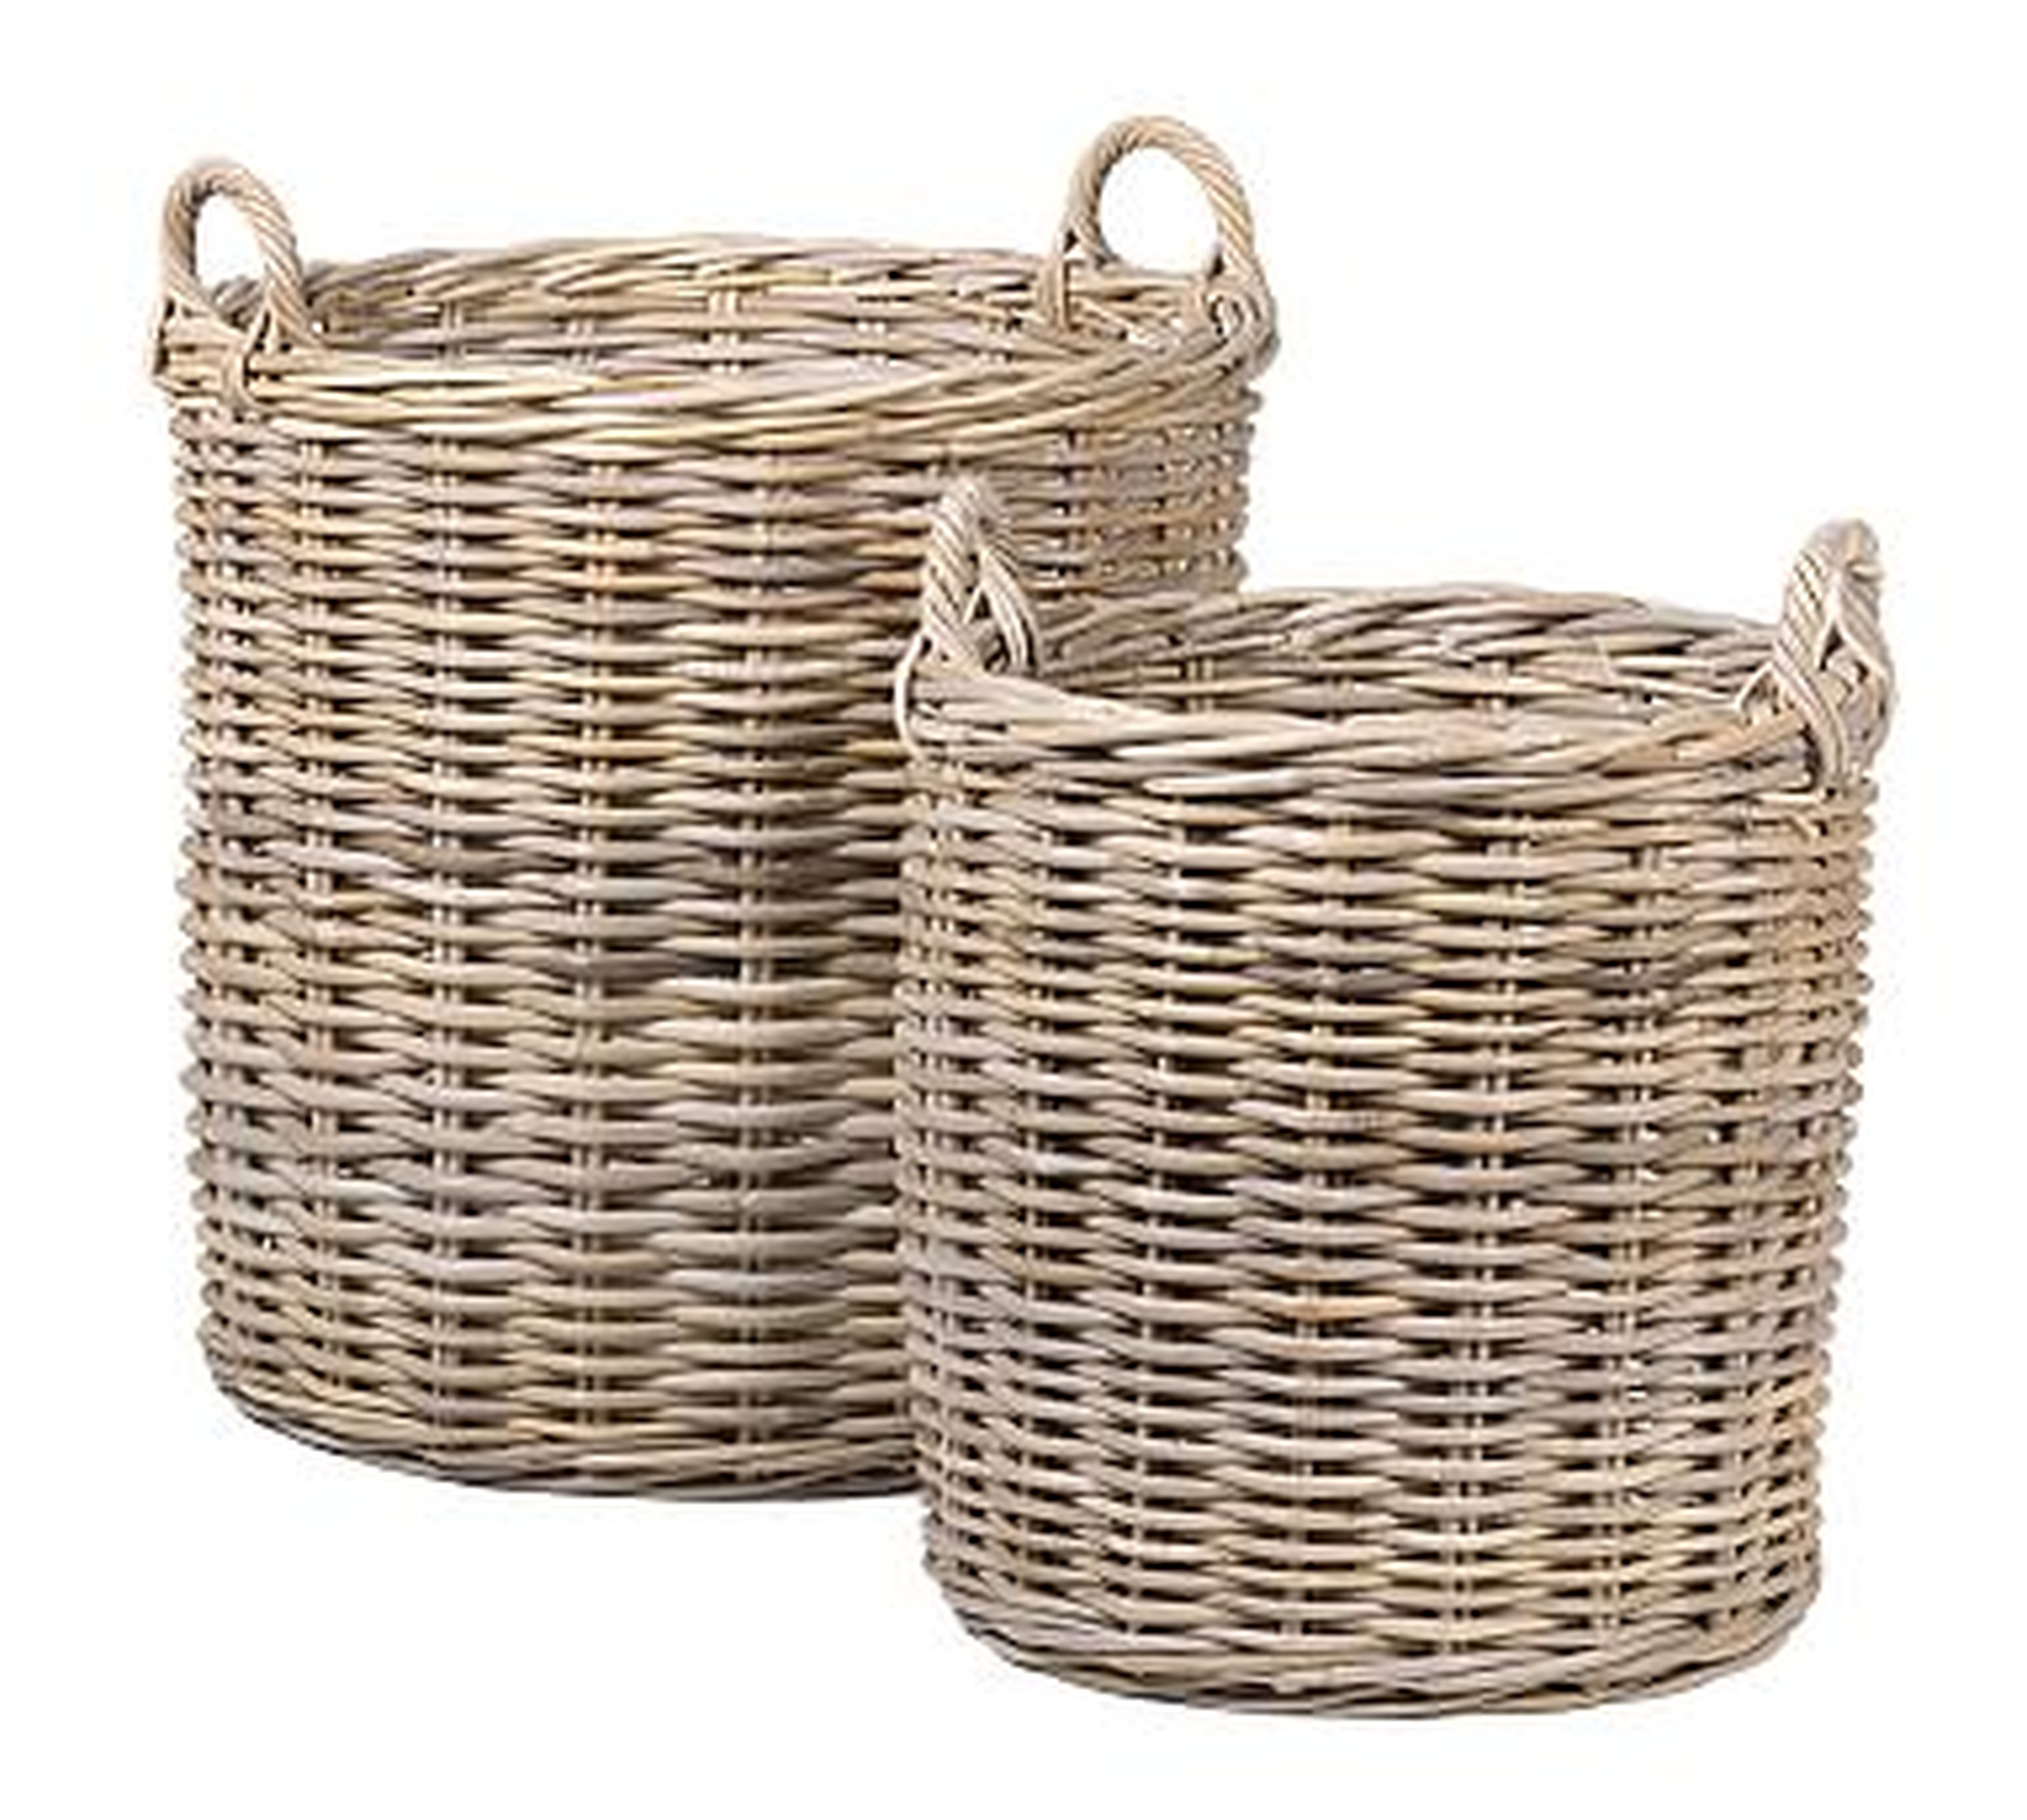 Portland Round Woven Tote Baskets, Set of 2 - Natural - Pottery Barn